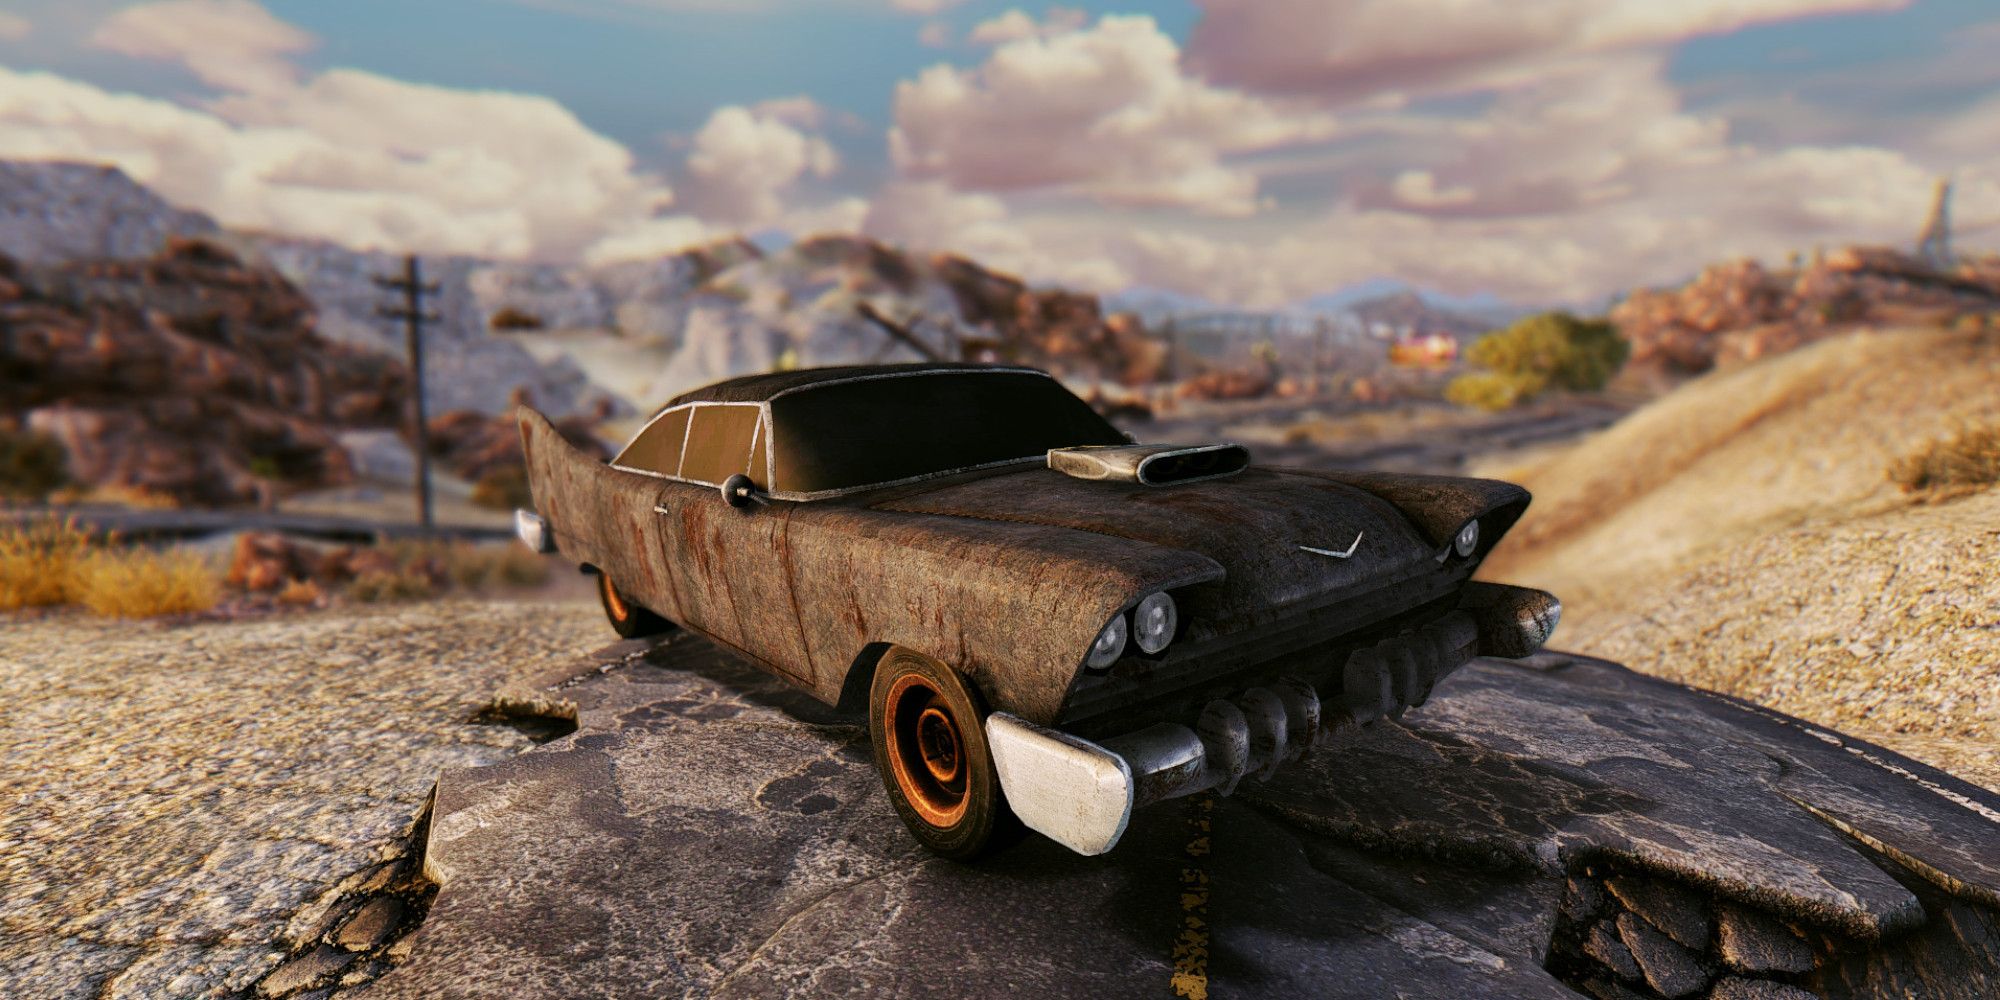 A car in the Fallout universe, modelled on a classic American muscle car